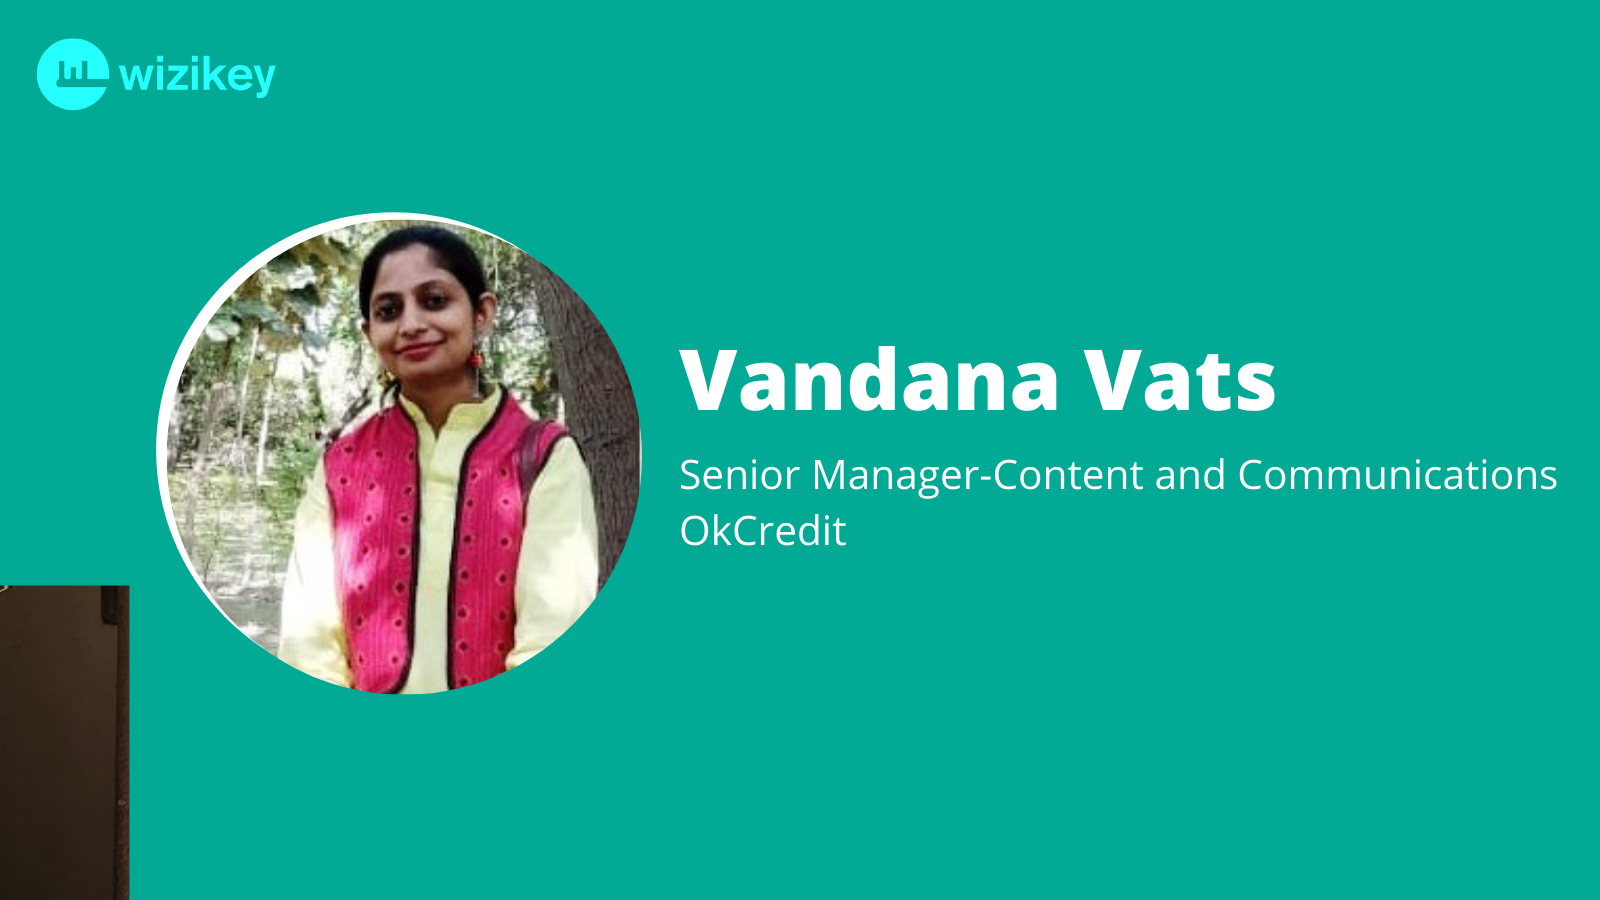 Data-driven storytelling is more credible: Vandana from OkCredit